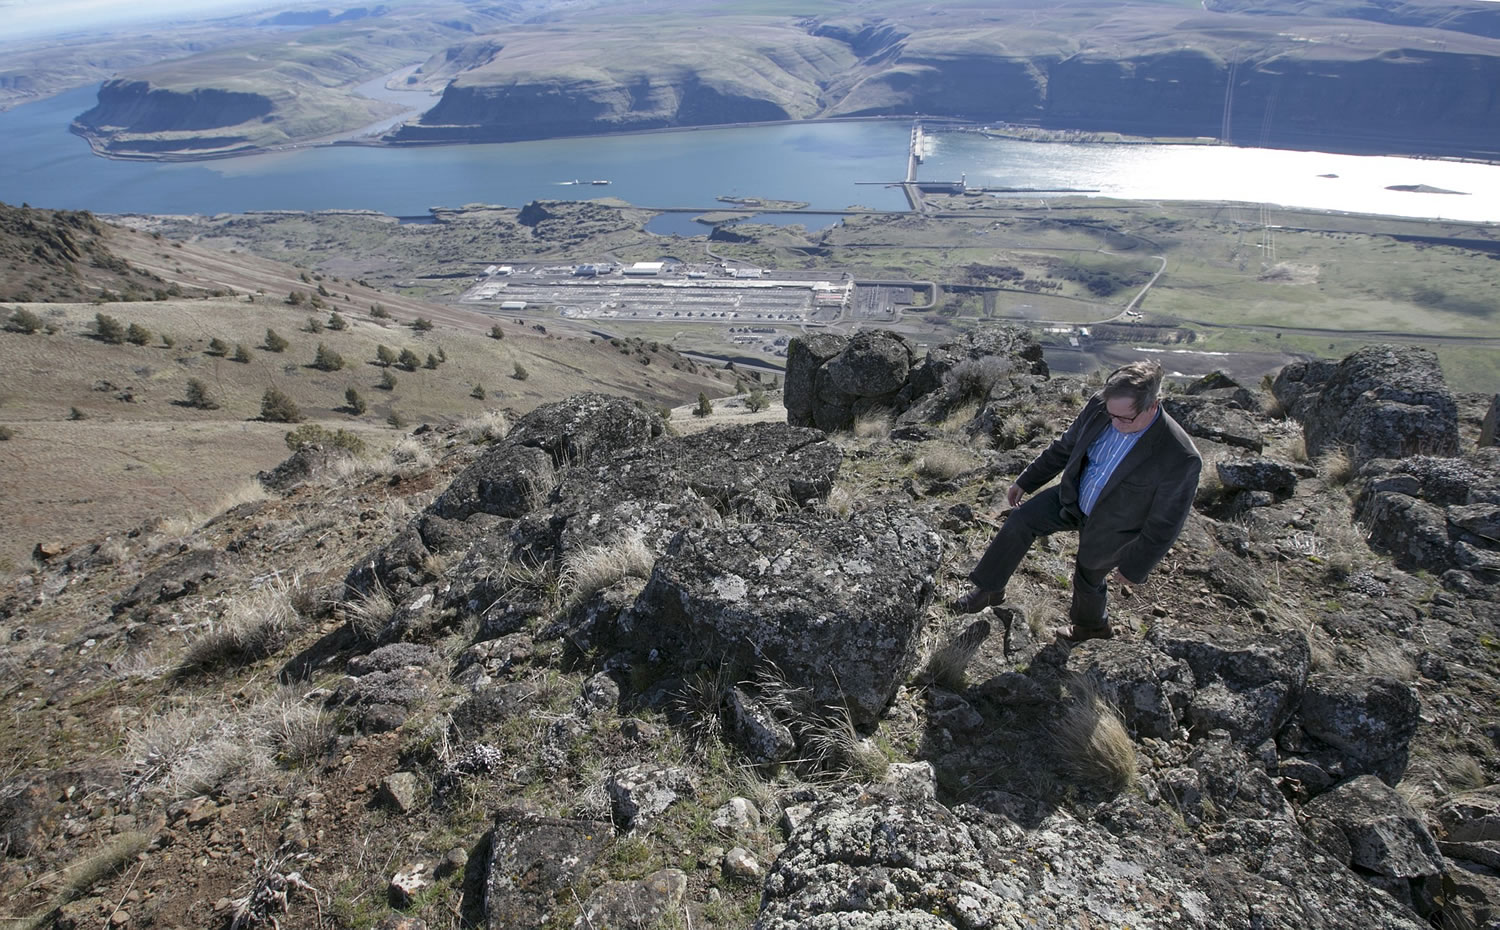 Gordon King/Yakima Herald-Republic
Randy Knowles, a Klickitat utility commissioner, walks back from a rocky outcrop overlooking the landscape east of Goldendale.